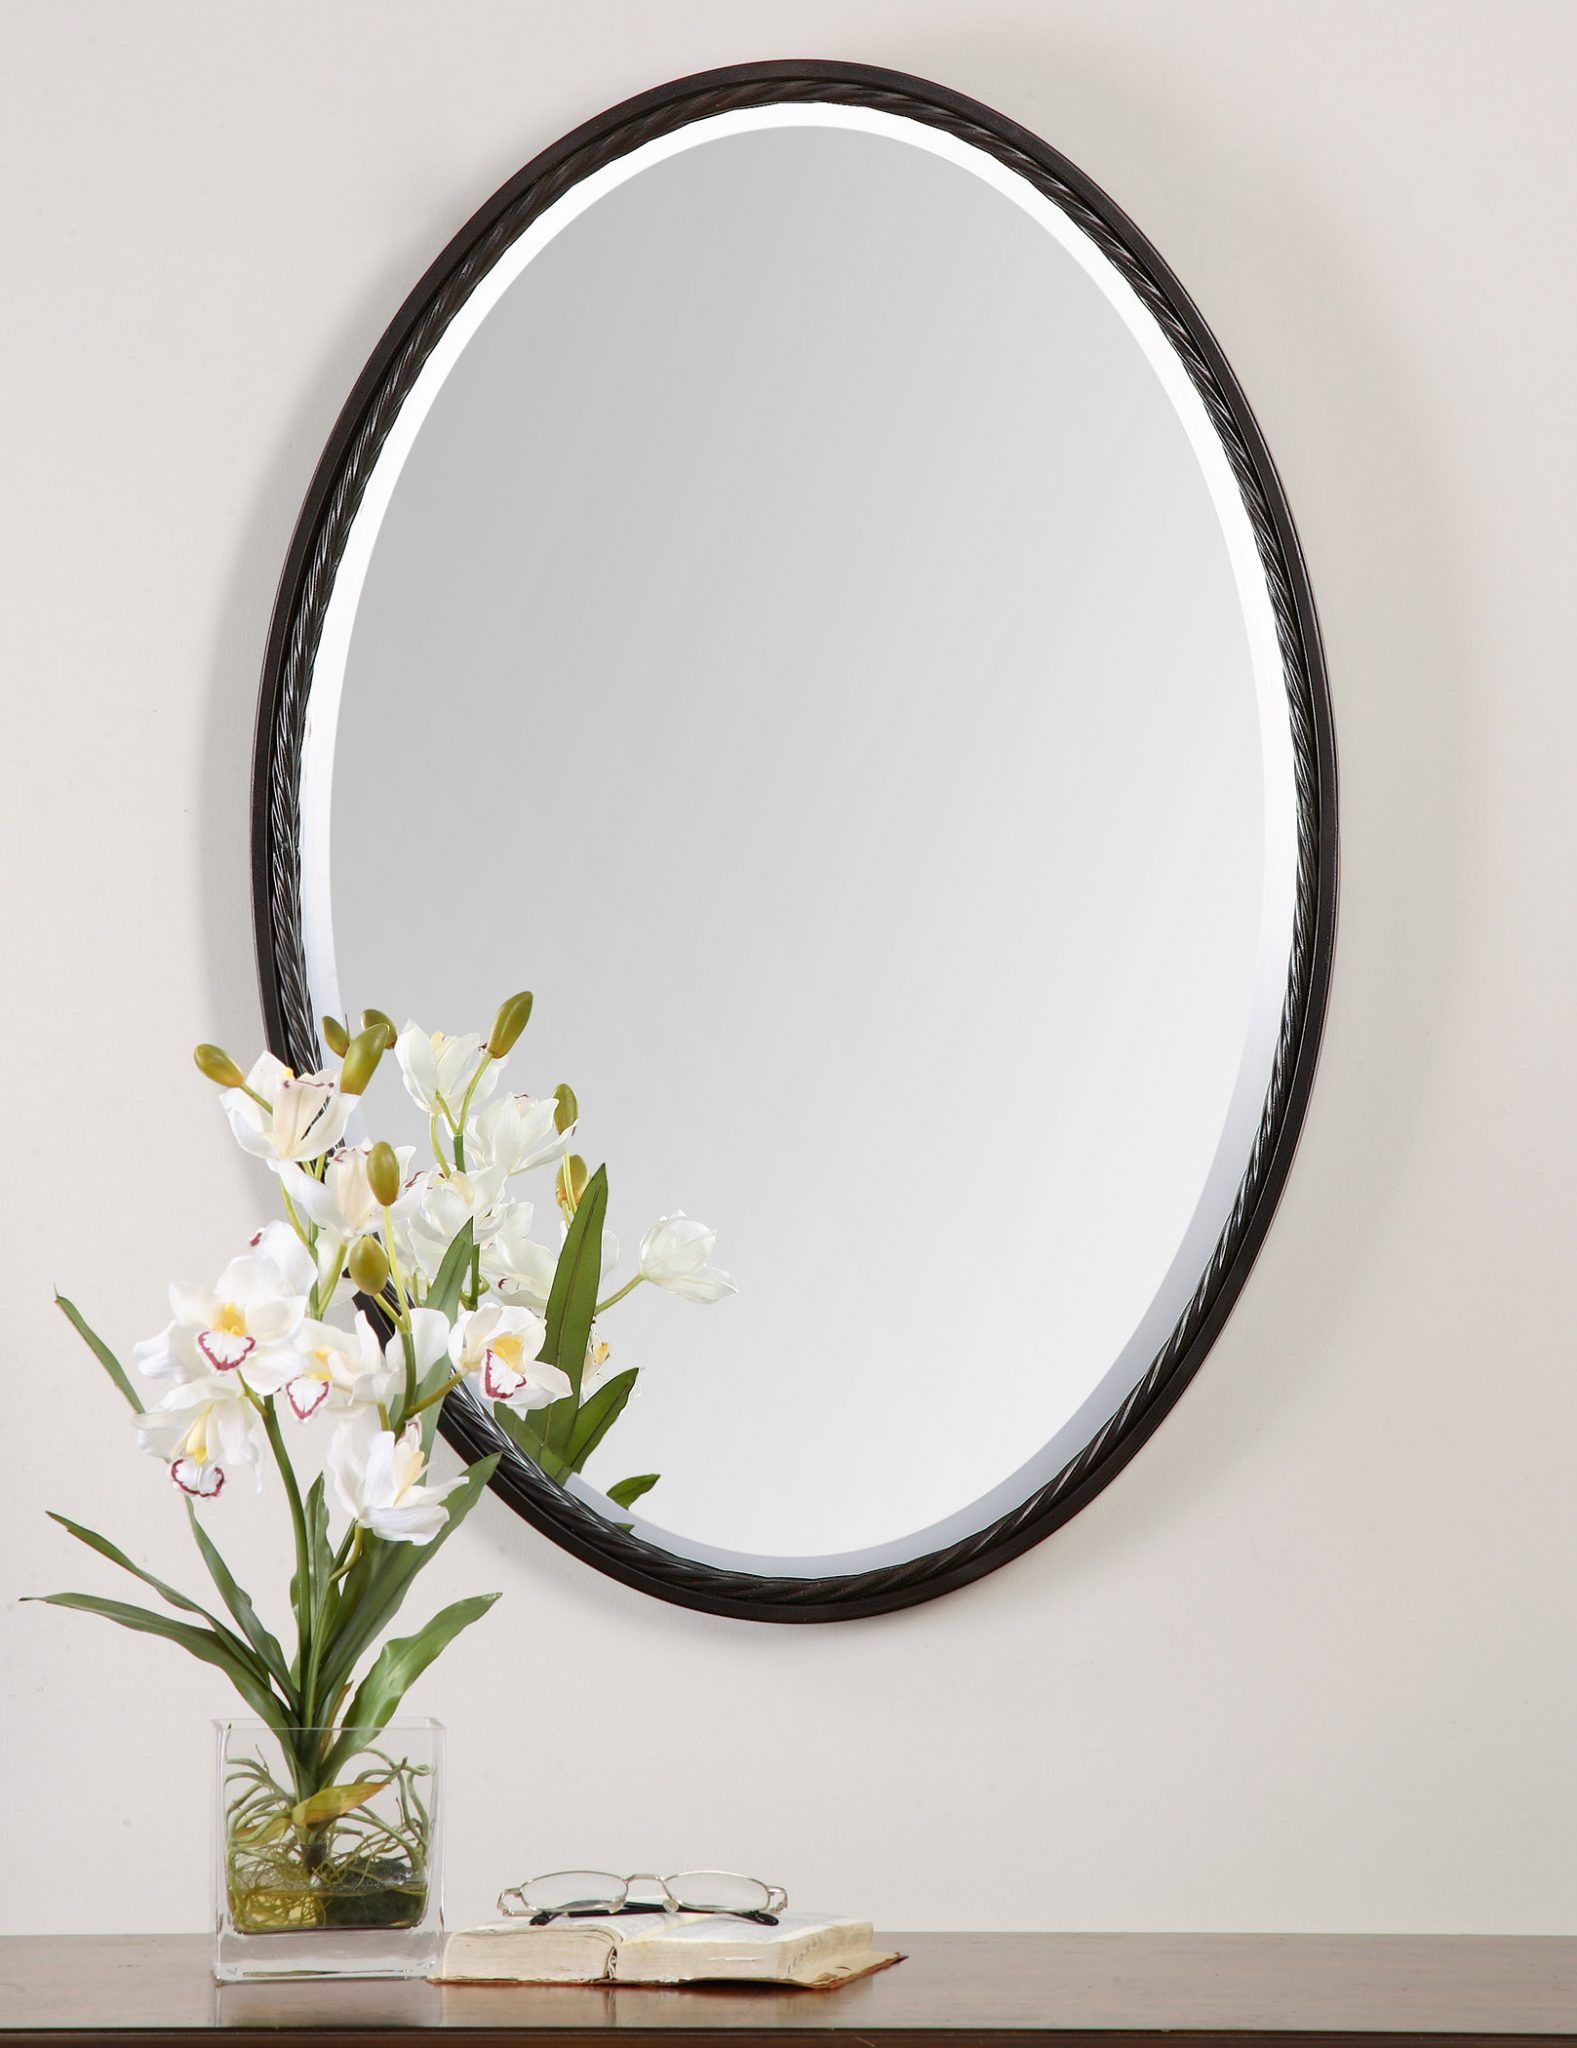 Uttermost Casalina Oil Rubbed Bronze Oval Mirror – Sacksteder'S For Oil Rubbed Bronze Finish Oval Wall Mirrors (View 15 of 15)